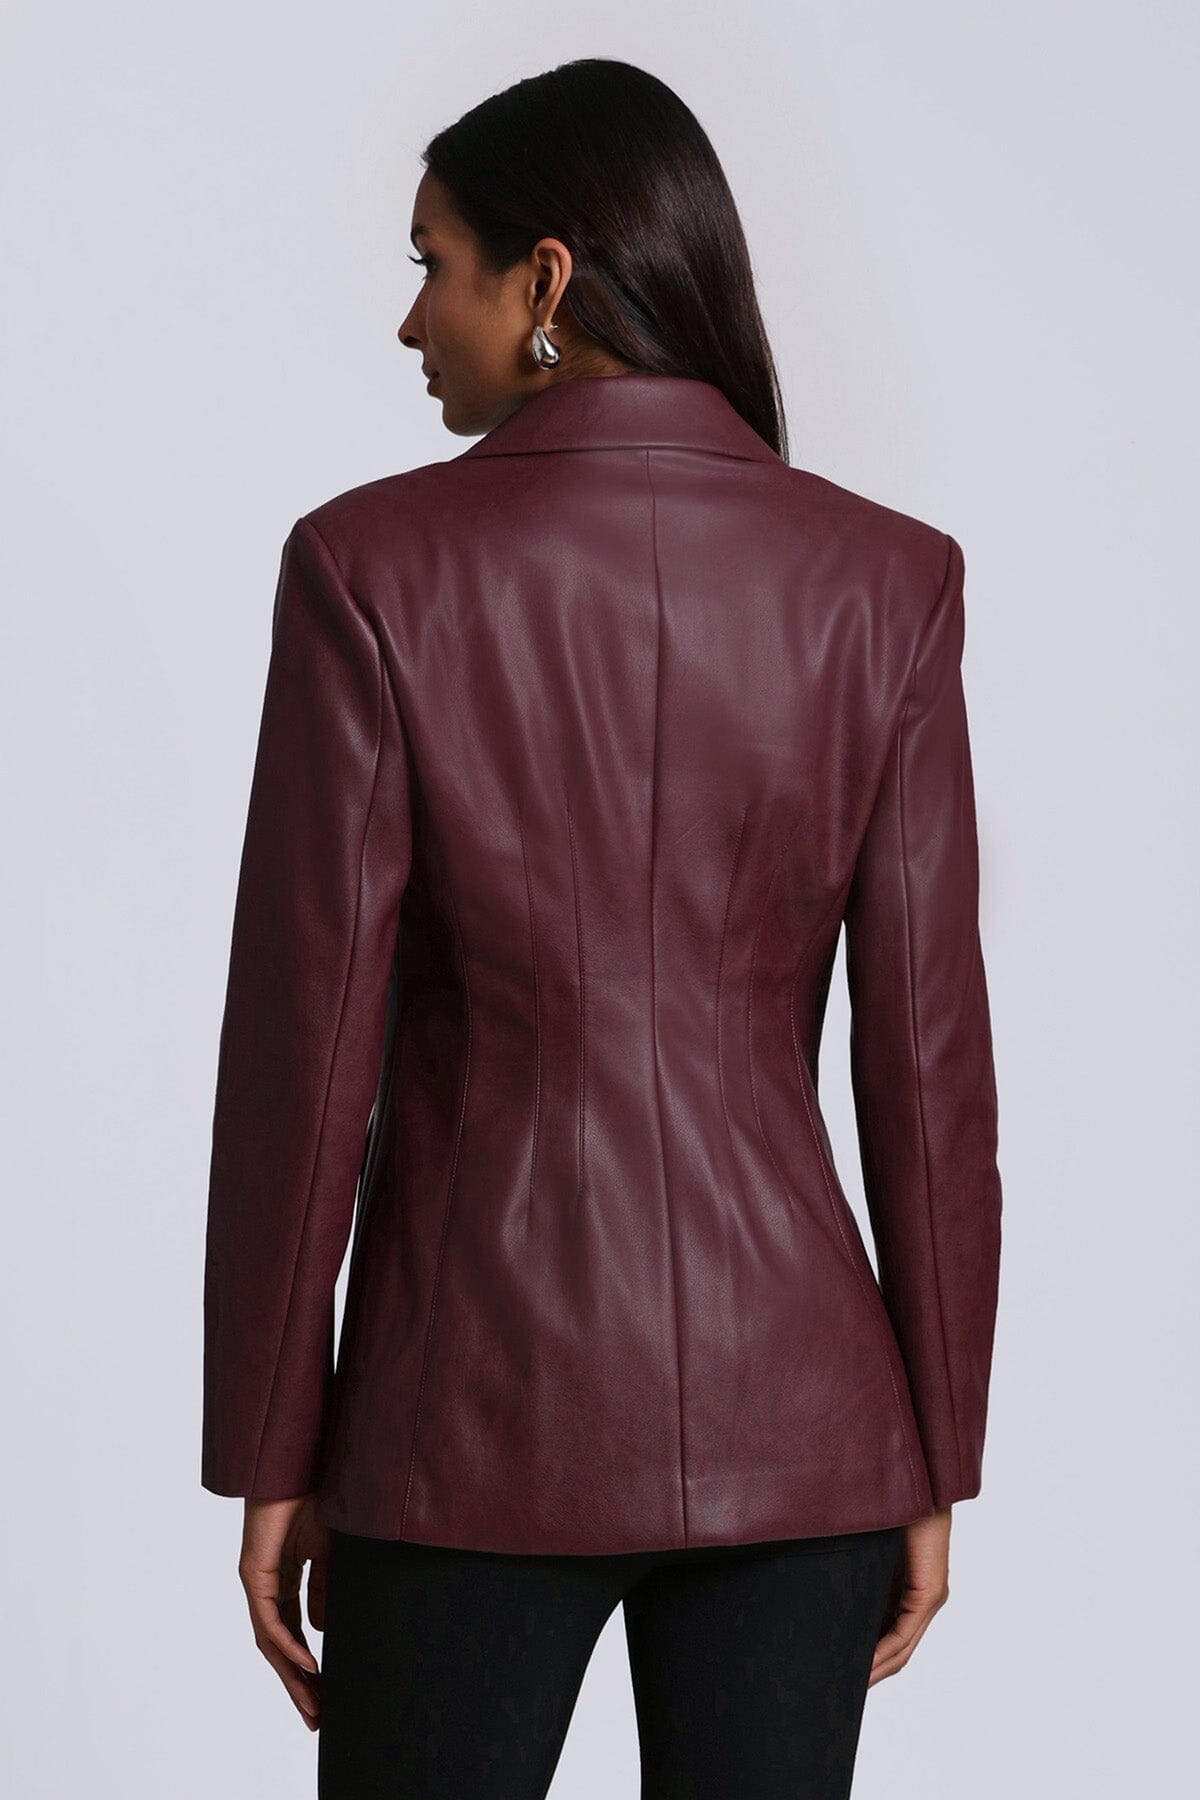 faux ever leather sculpted blazer jacket coat oxblood red - women's figure flattering day to night blazers outerwear